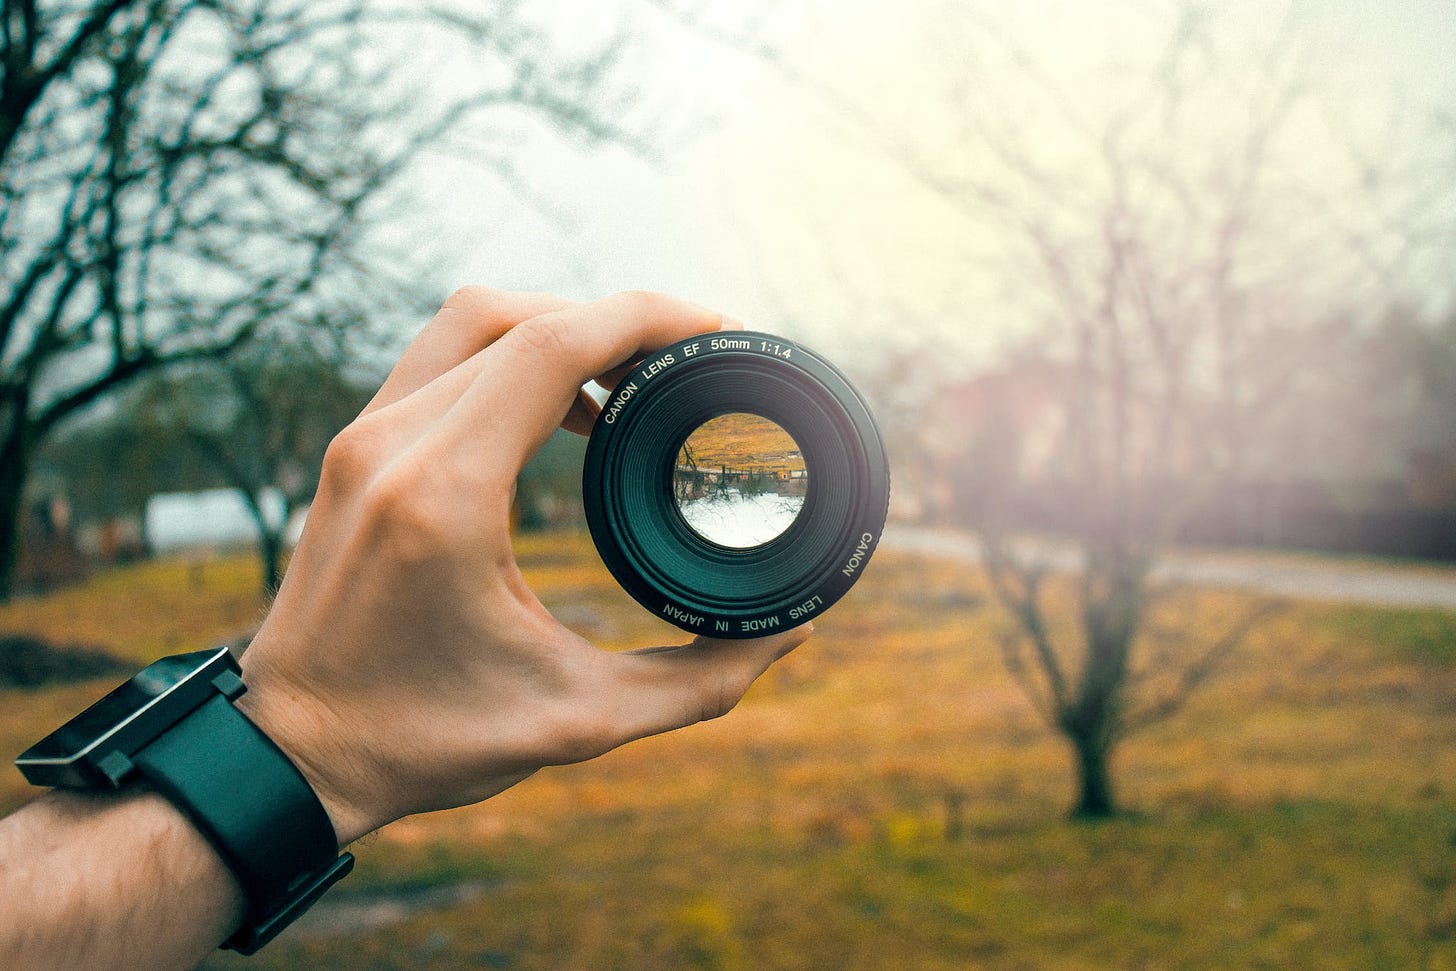 Understanding Copyright and Image Rights in Stock Photos